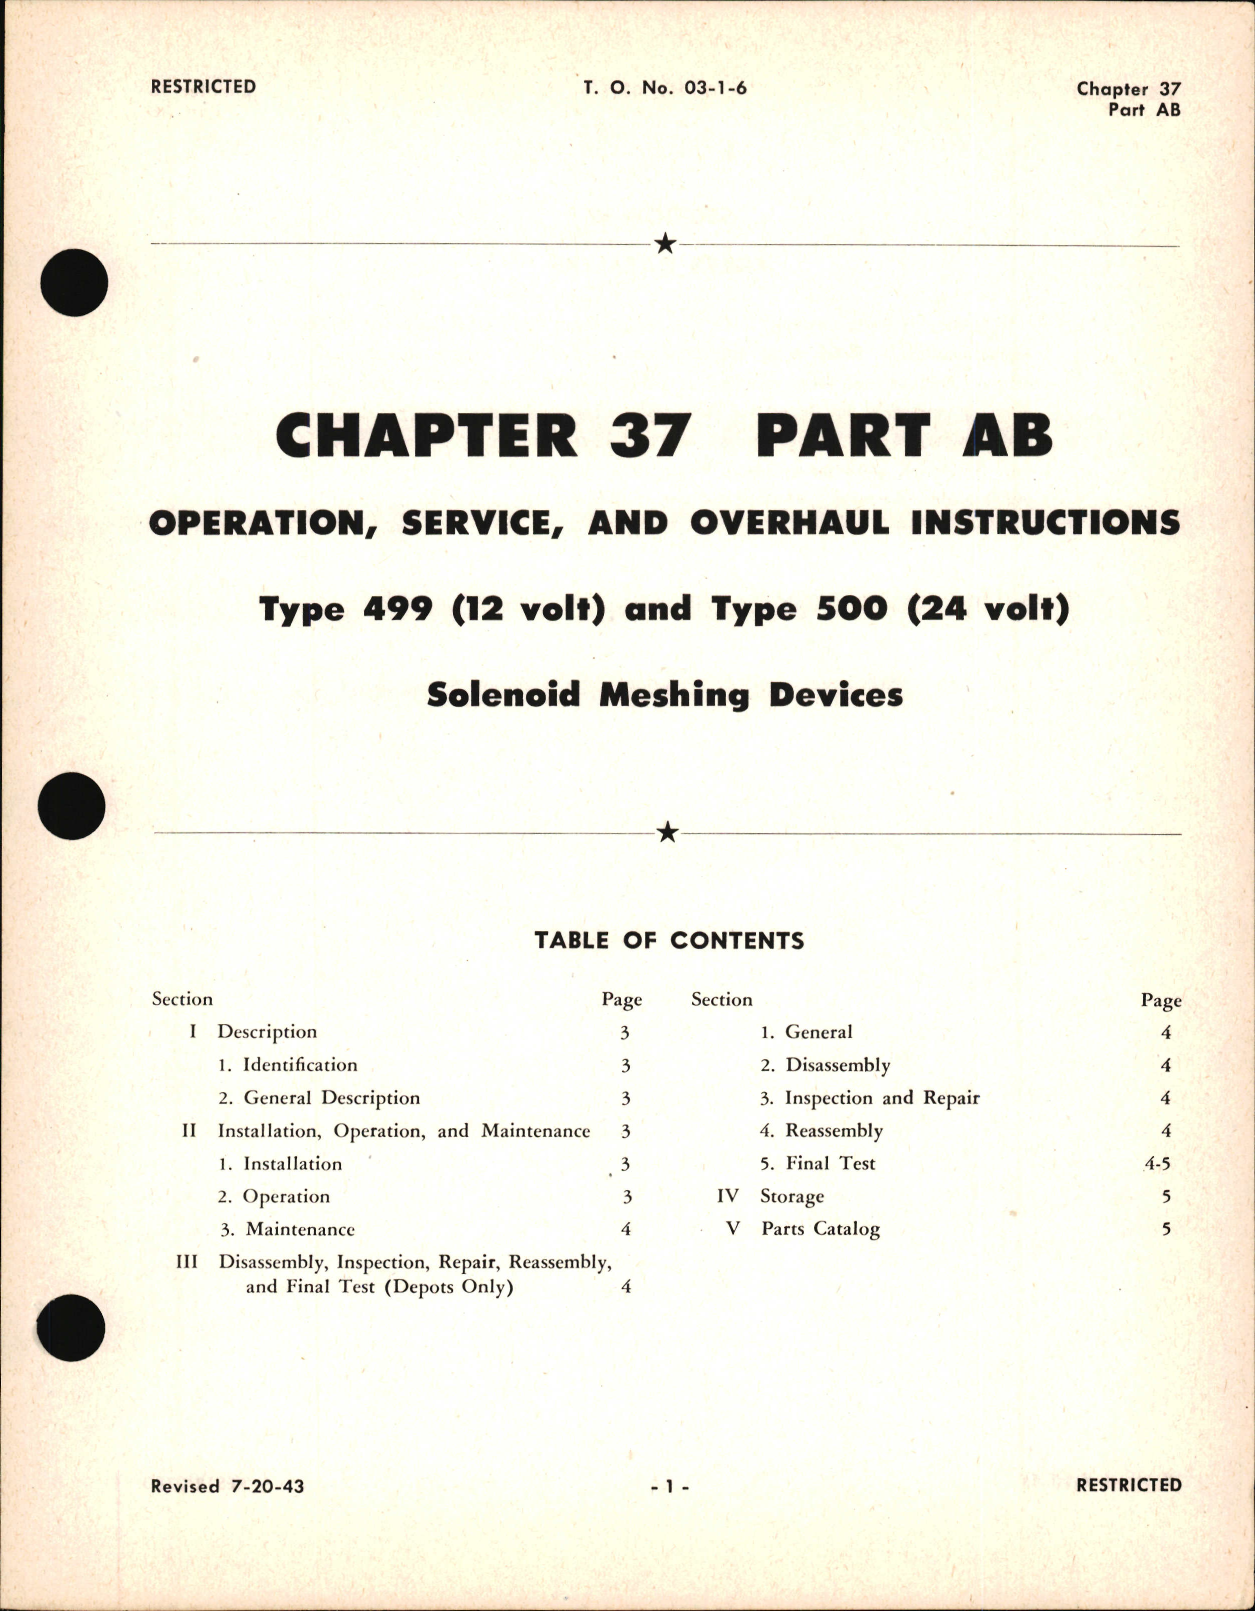 Sample page 1 from AirCorps Library document: Operation, Service, and Overhaul Instruction for Solenoid Meshing Devices, Chapter 37 Part AB